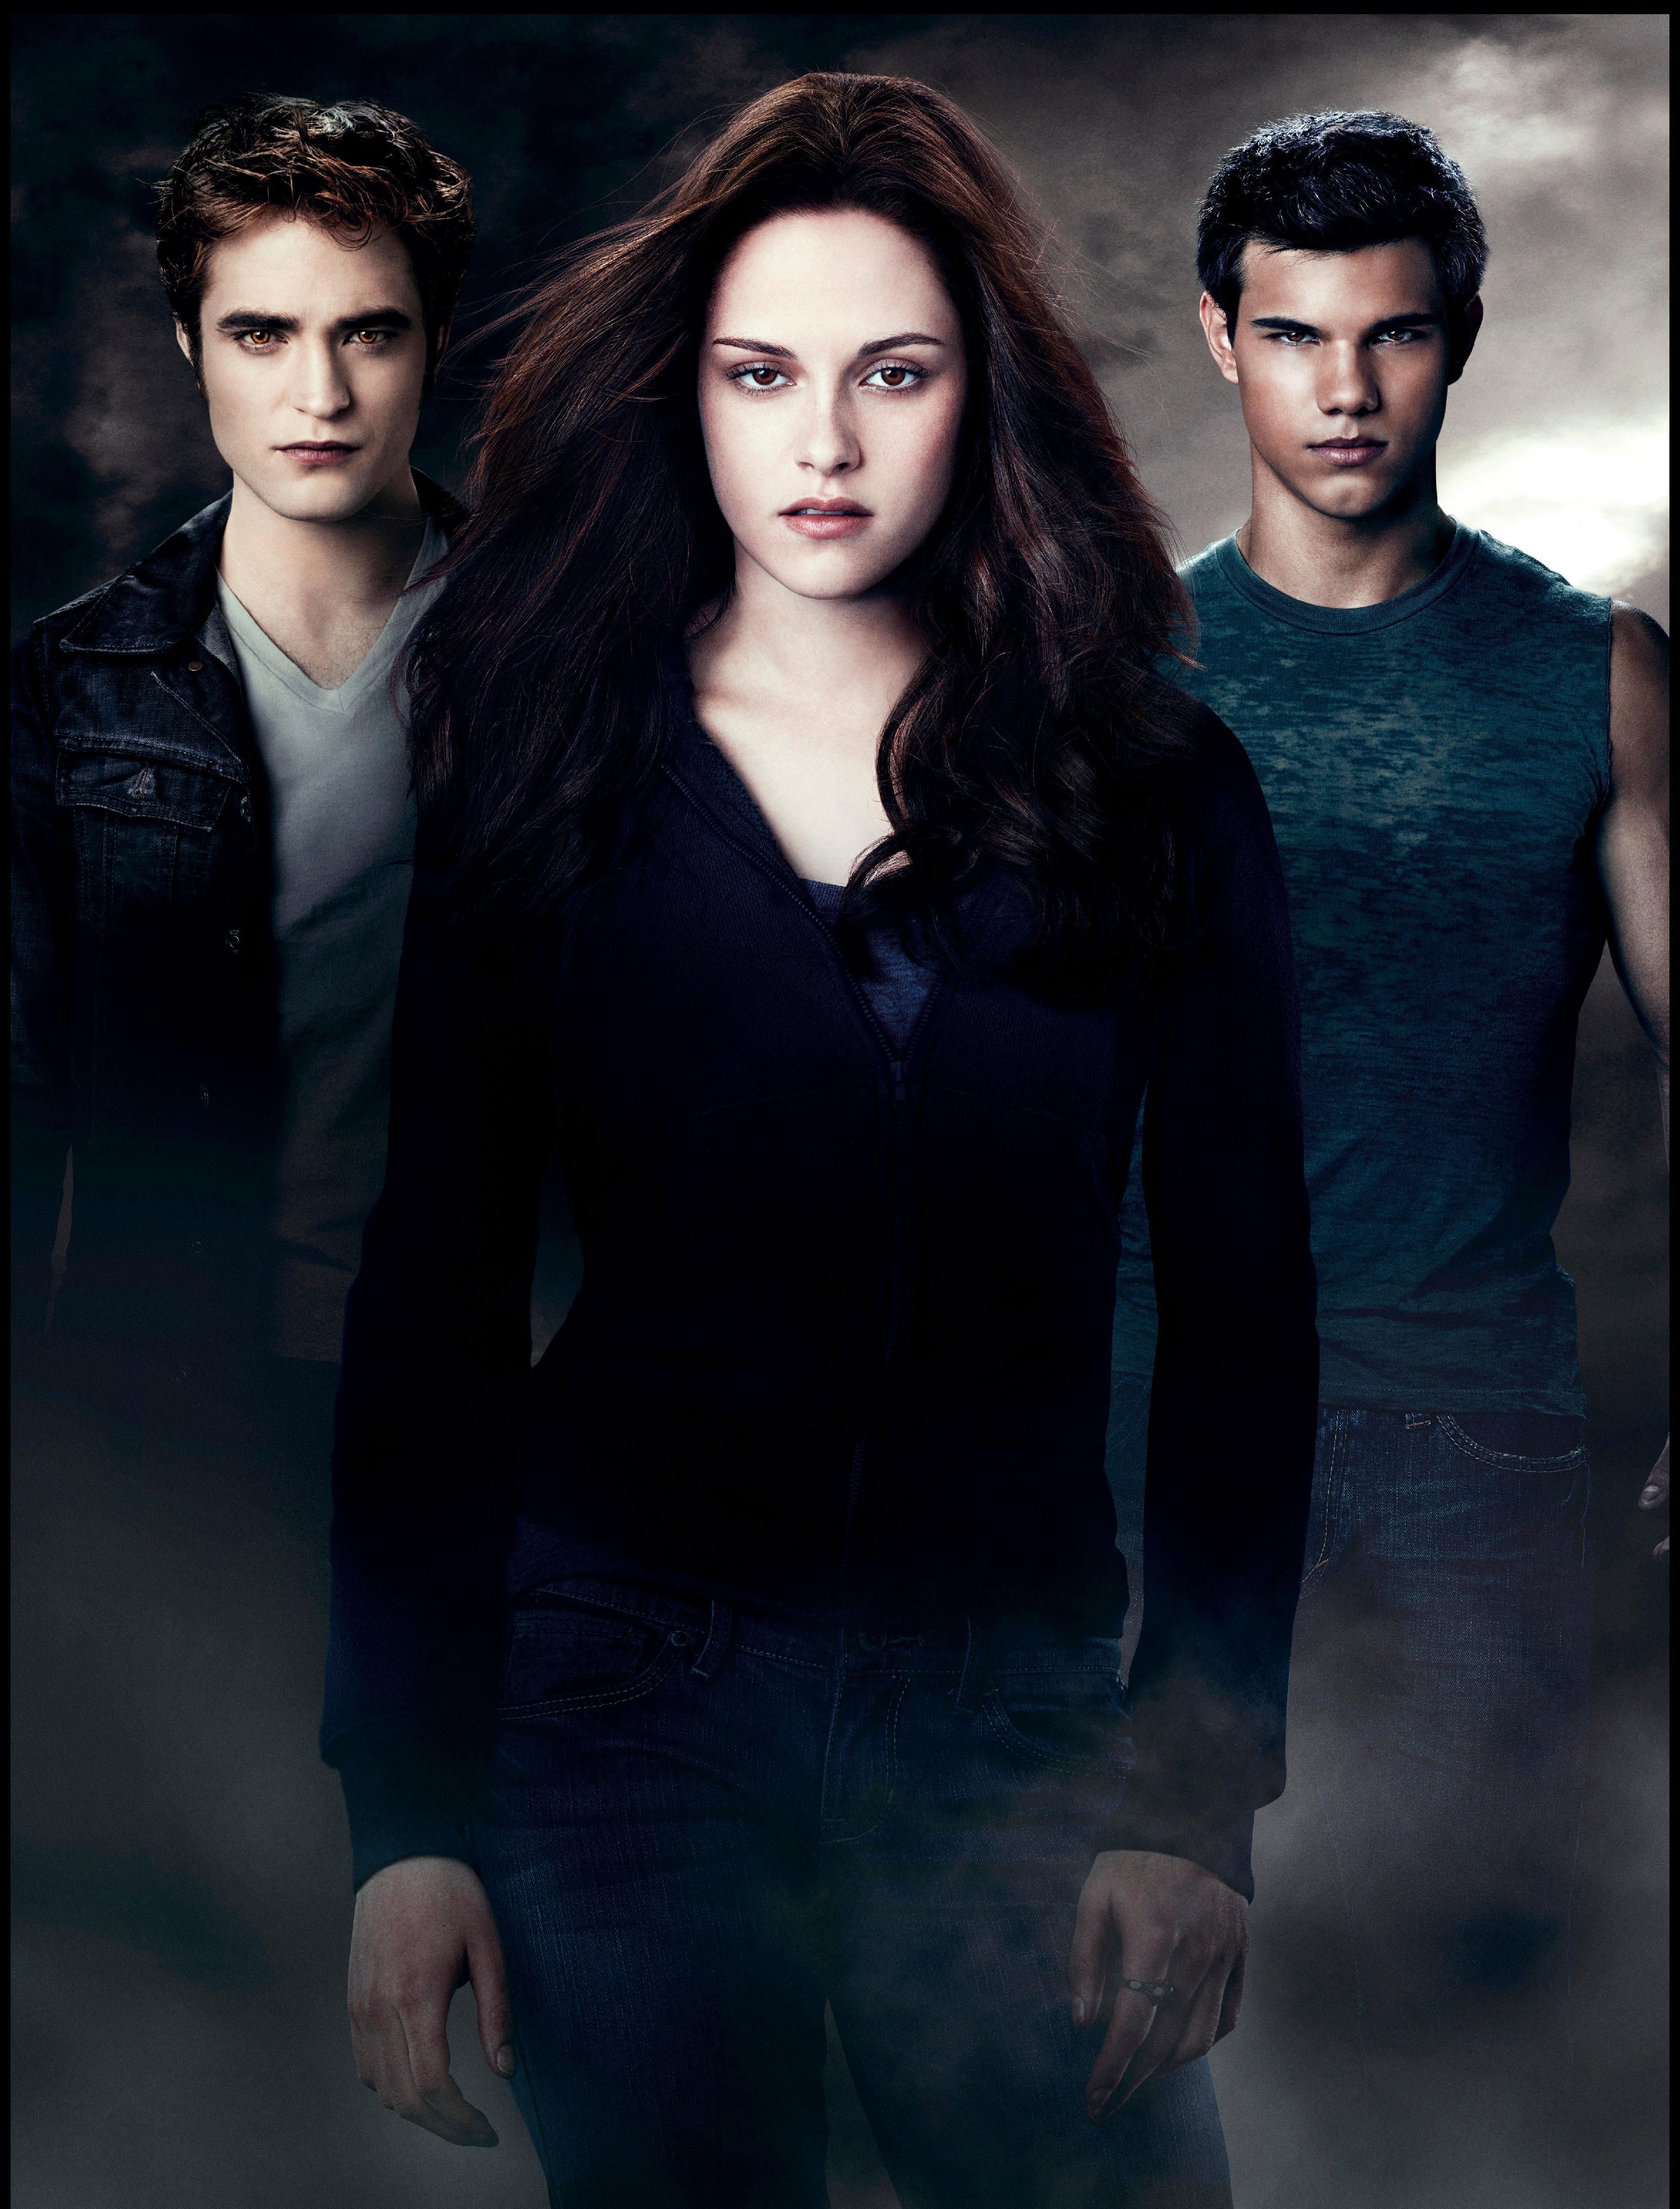 What would the Twilight movie look like without using the blue